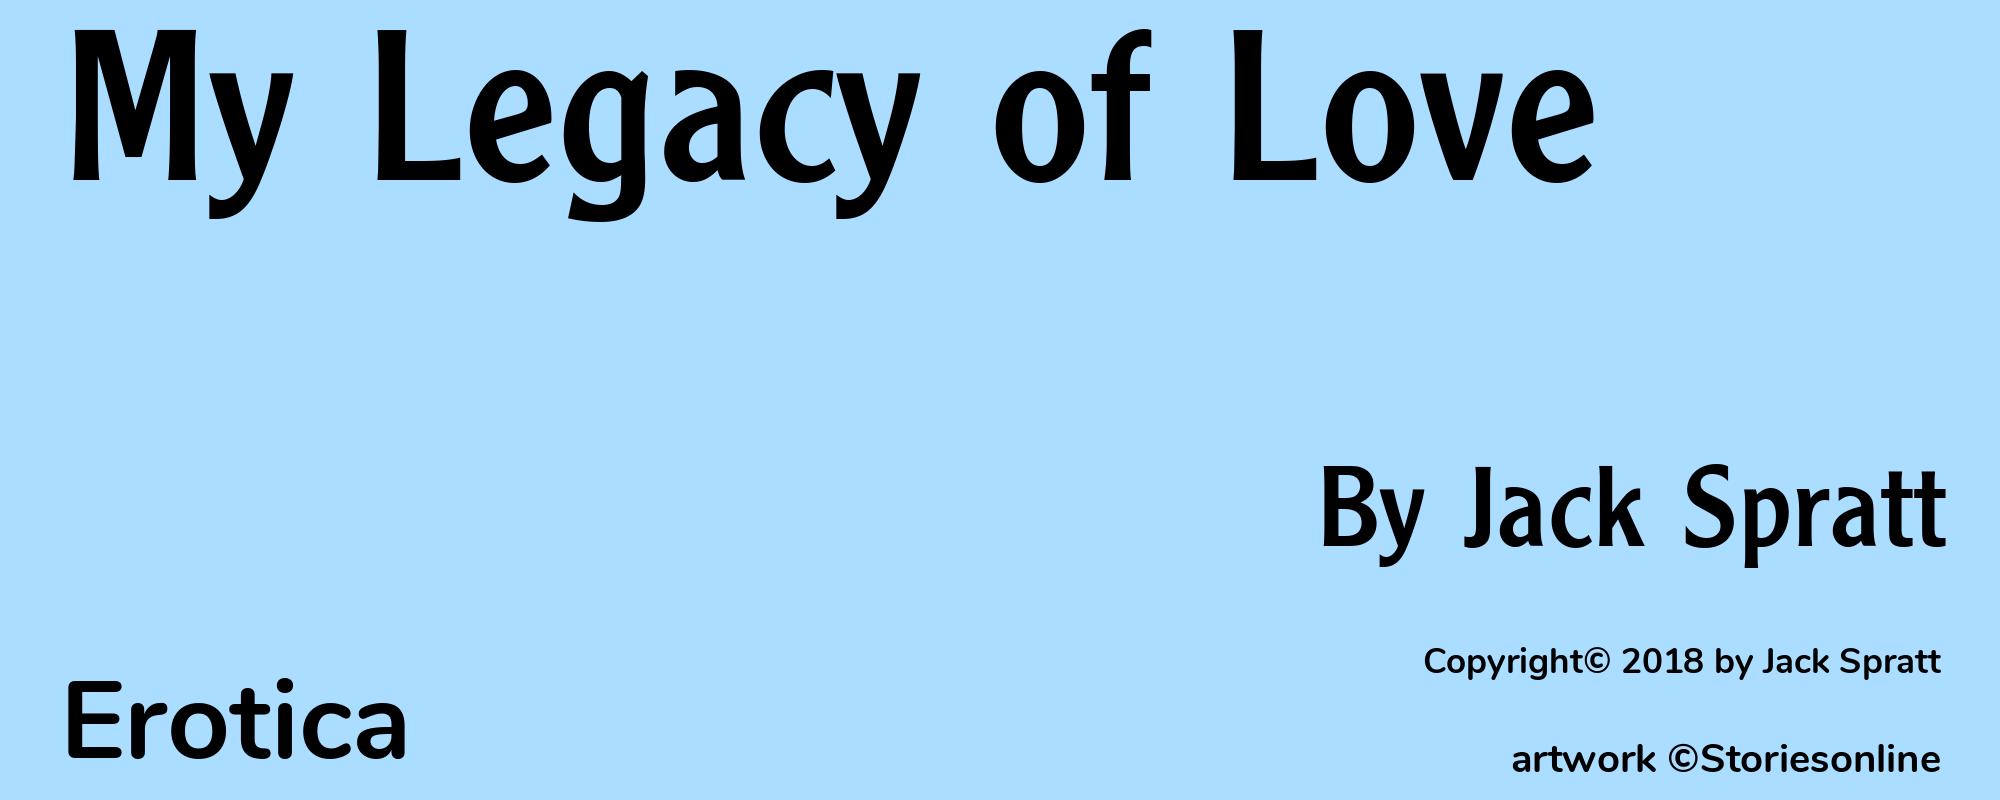 My Legacy of Love - Cover